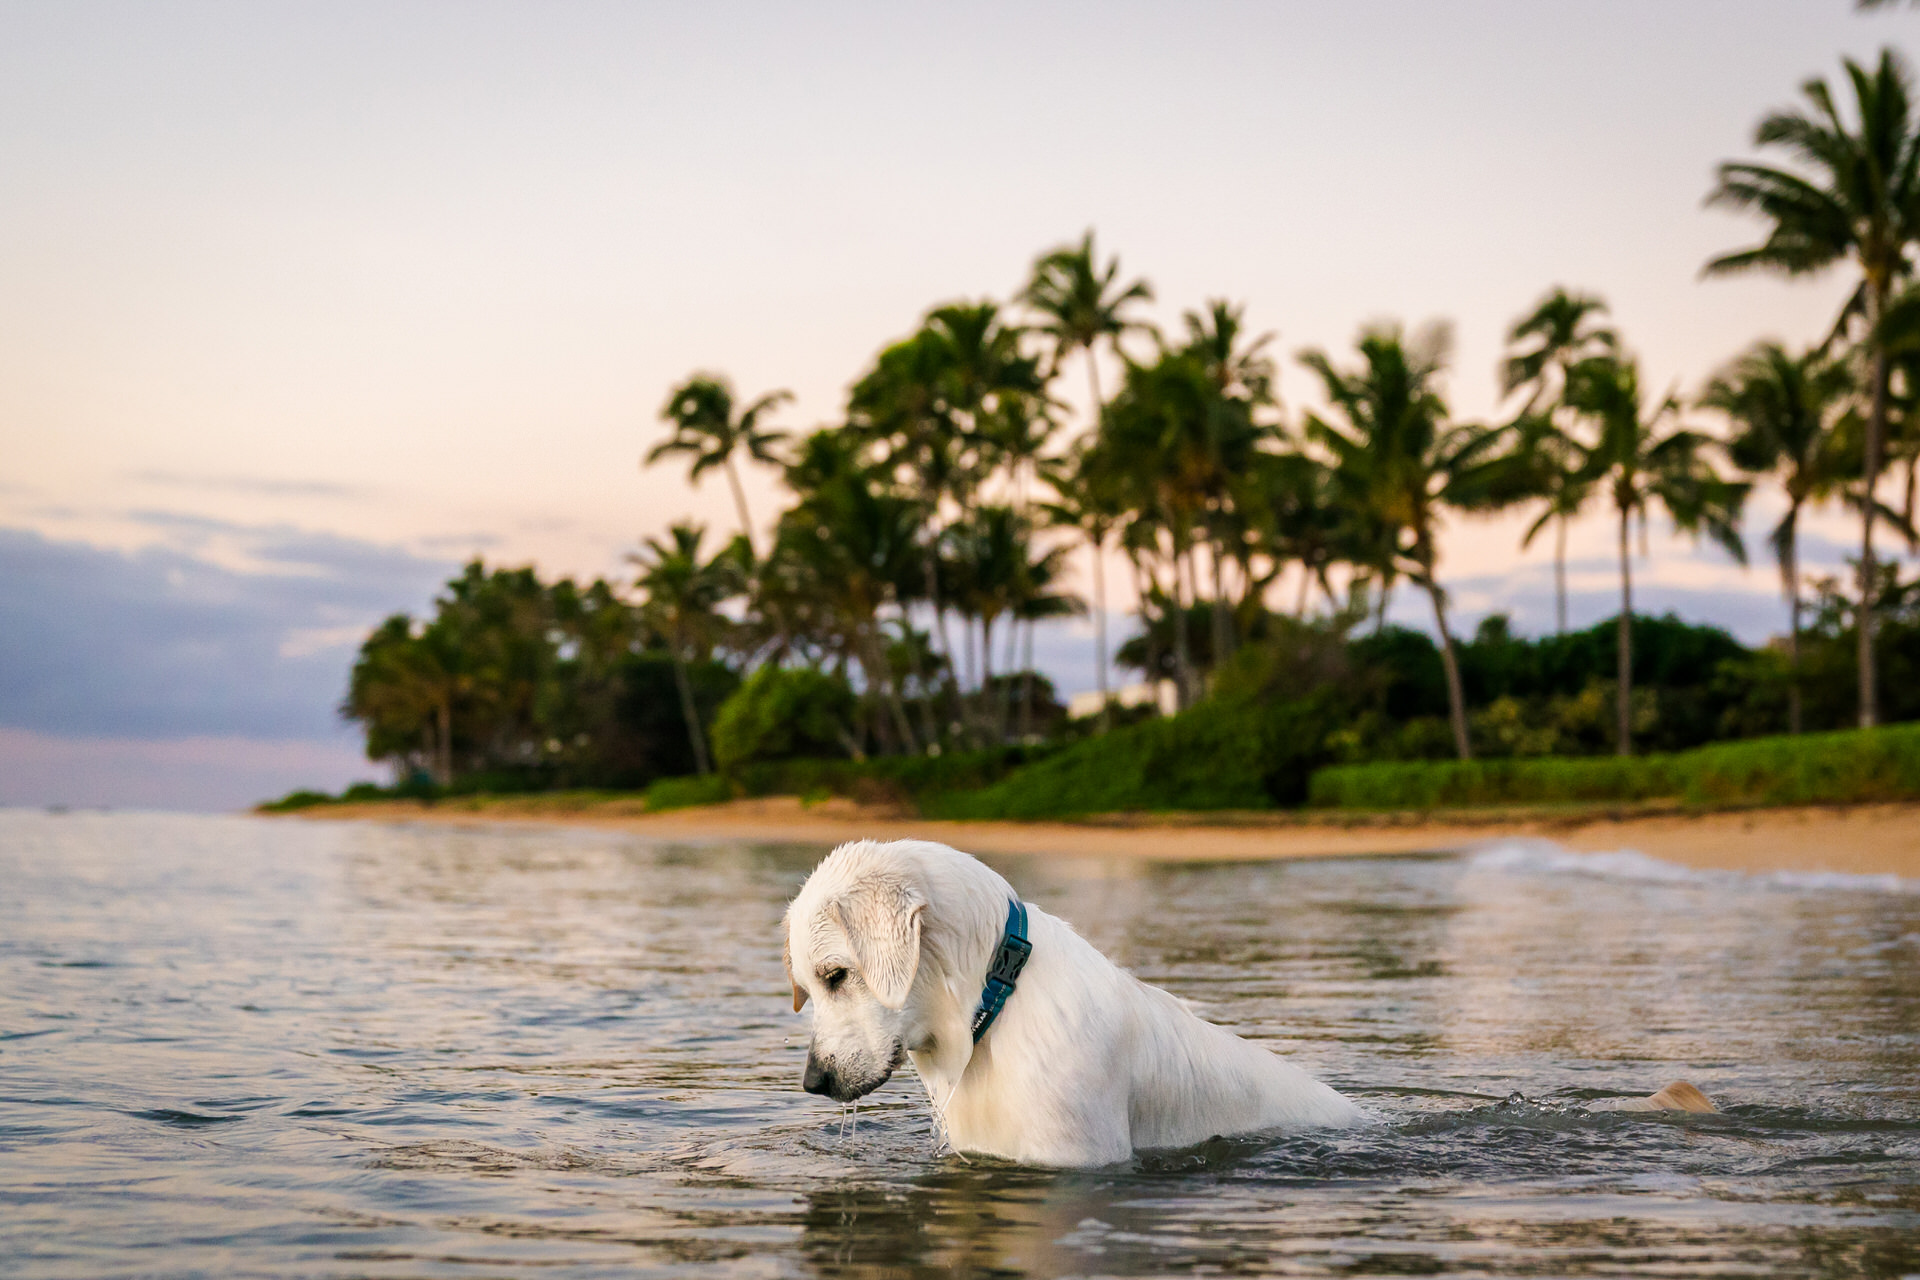 Dog wading in water at tropical beach sunset.